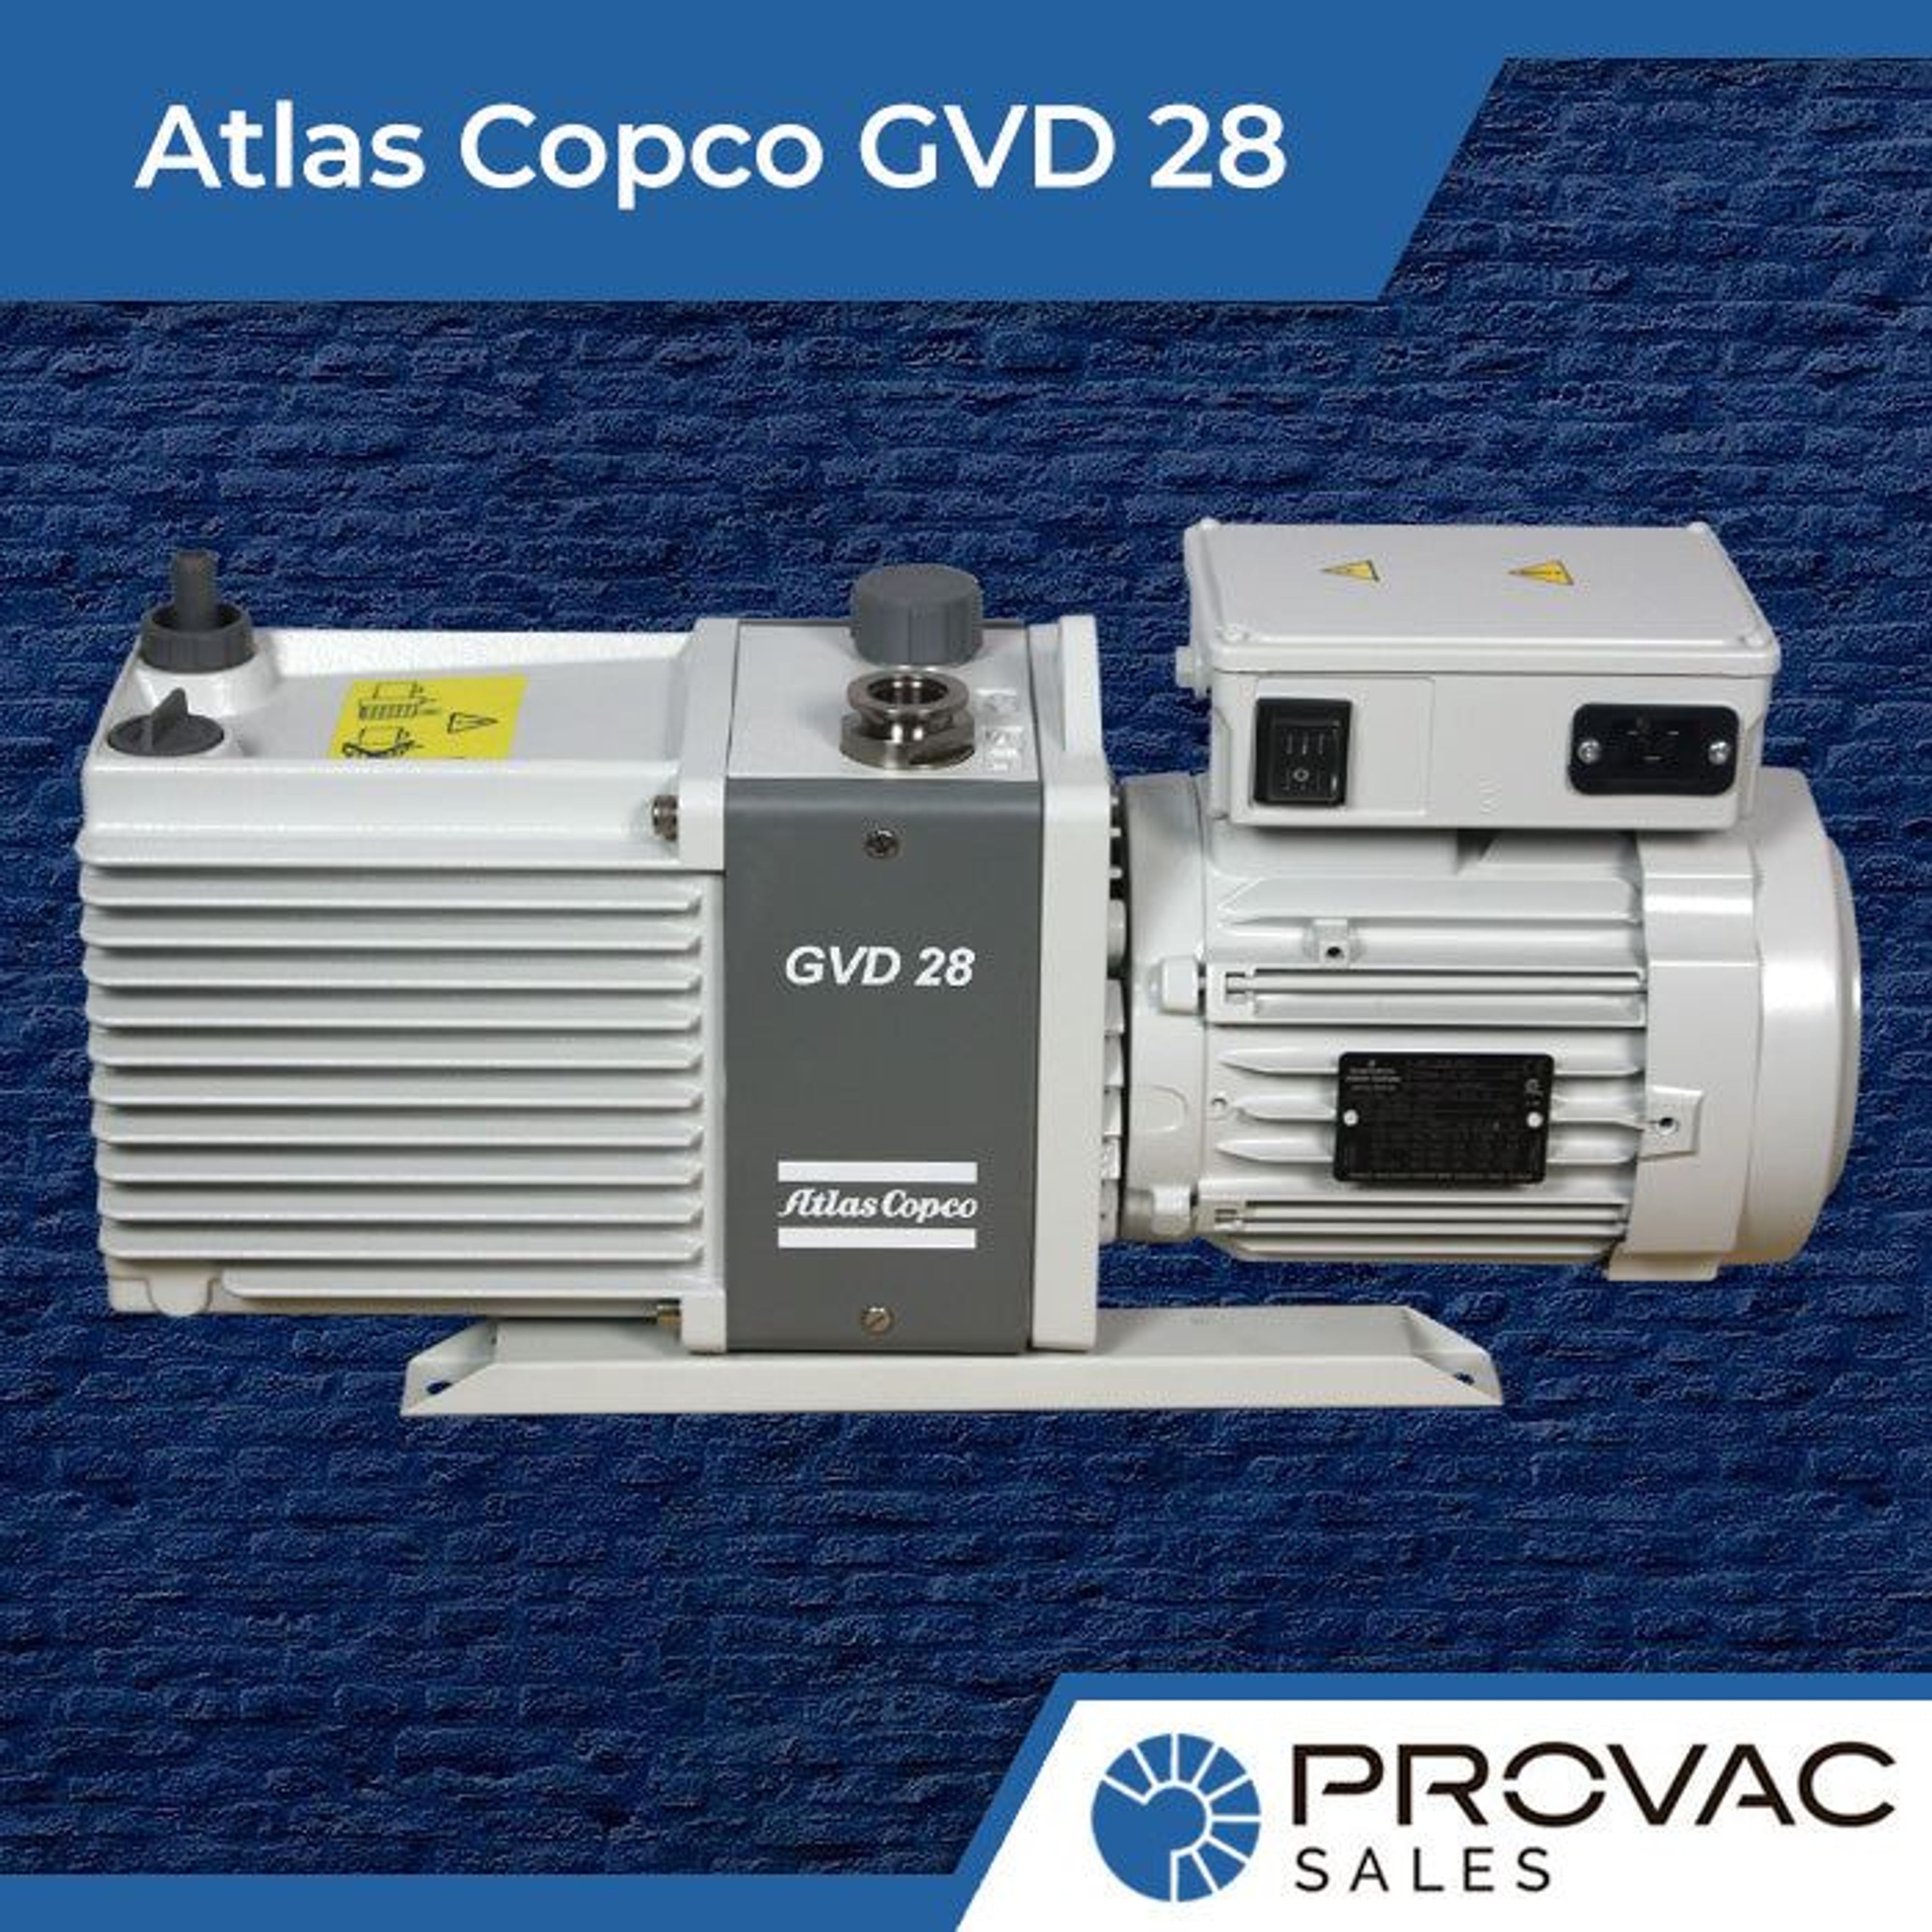 Atlas Copco GVD 28 Rotary Vane Pumps, In Stock Background